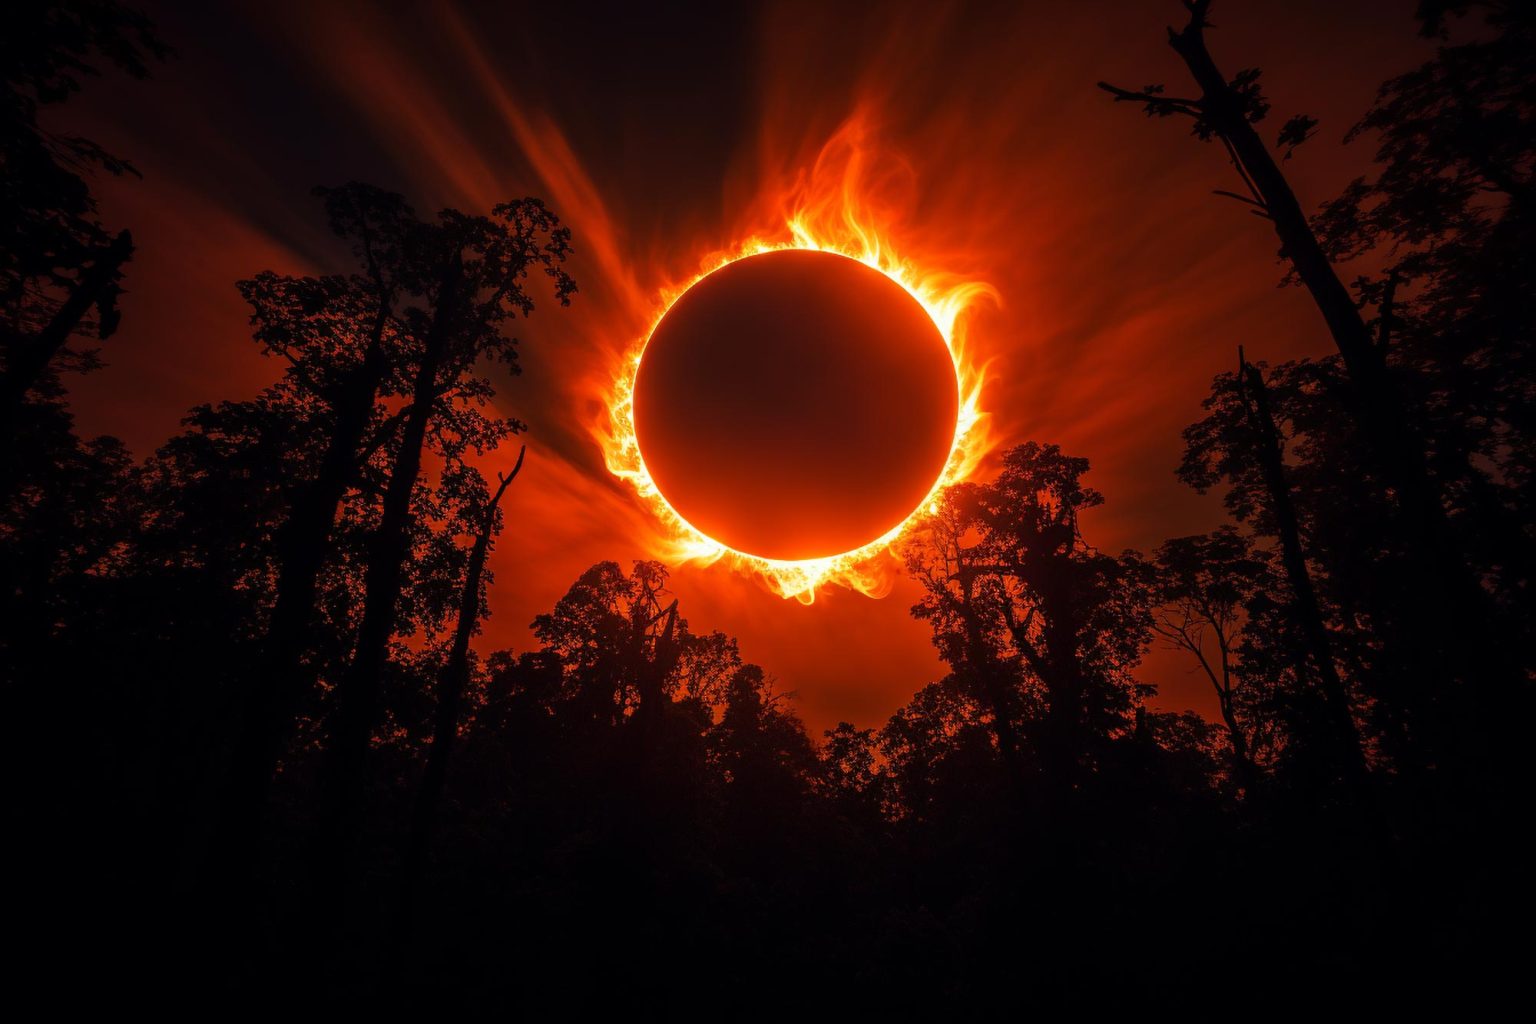 Five NASA Tips for Photographing the “Ring of Fire” Solar Eclipse